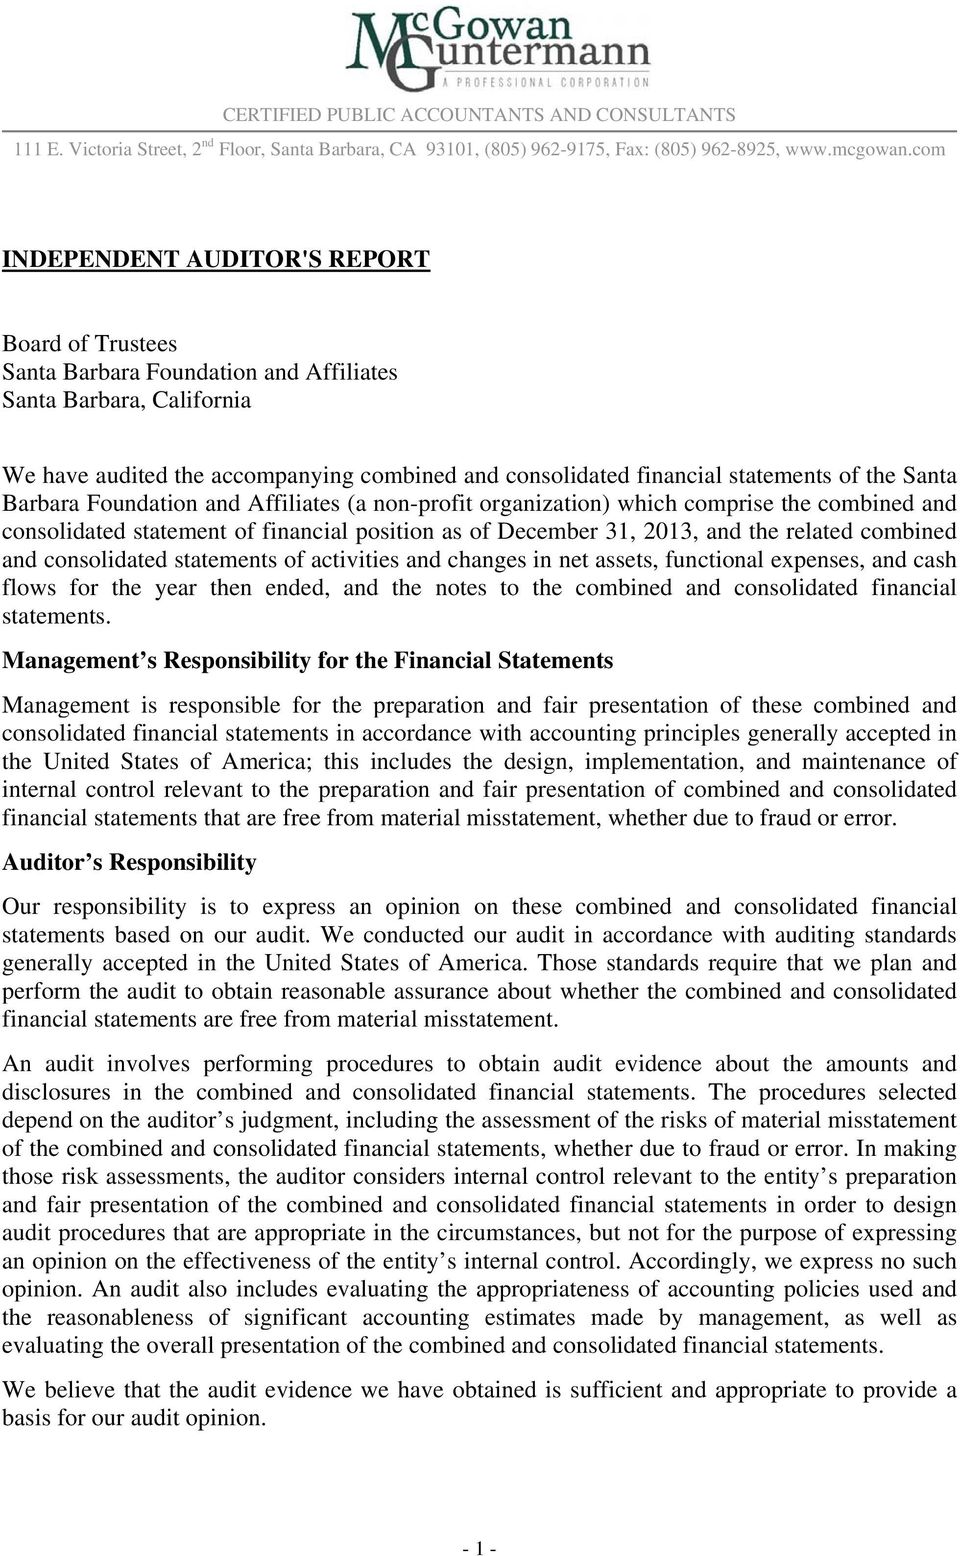 the Santa Barbara Foundation and Affiliates (a non-profit organization) which comprise the combined and consolidated statement of financial position as of December 31, 2013, and the related combined